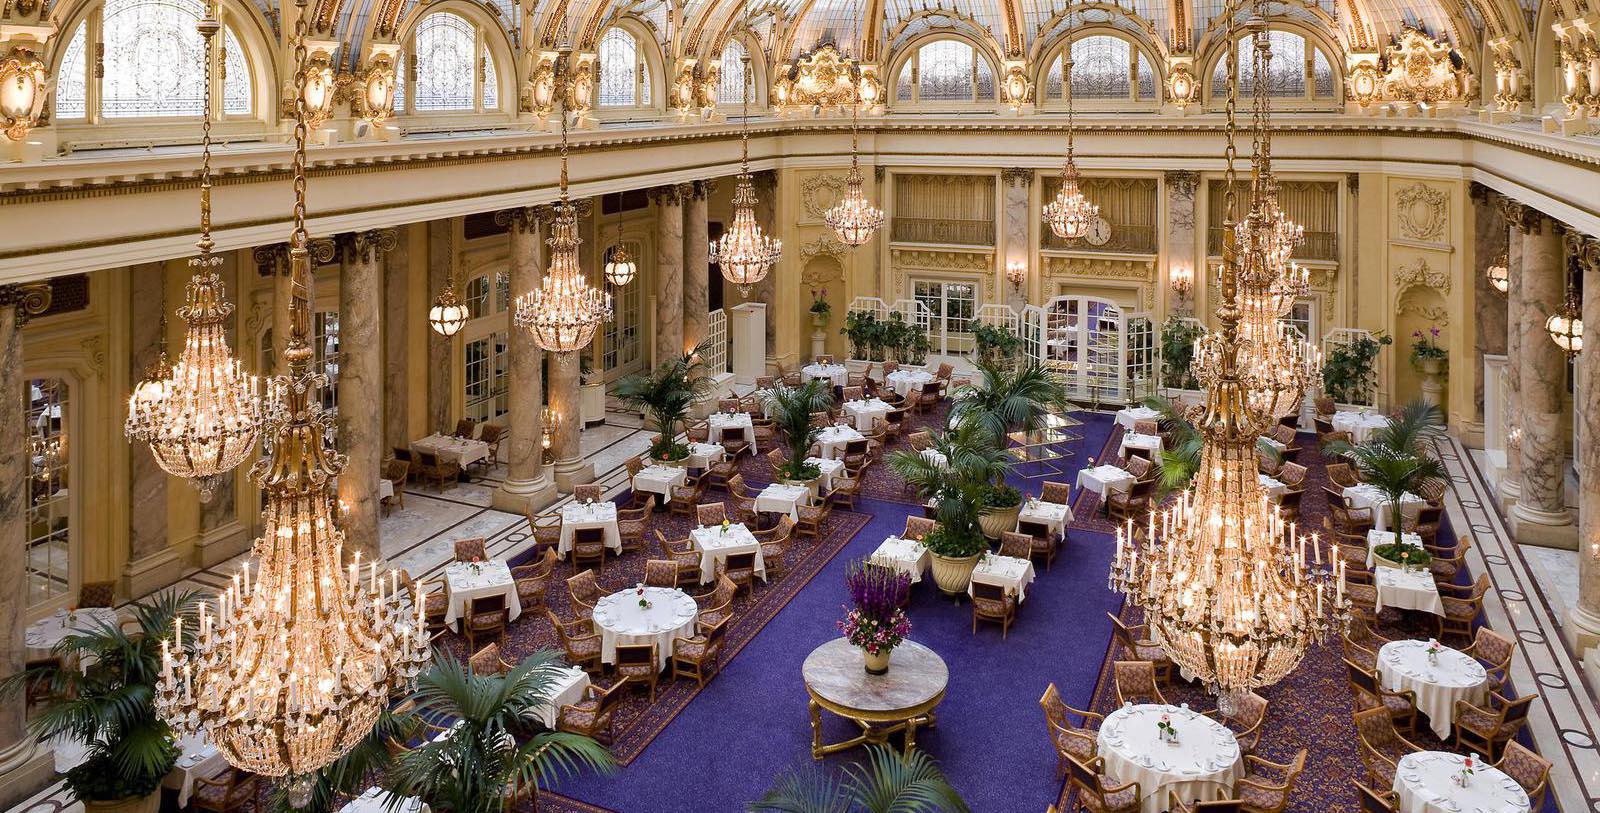 Image of the Garden Court of the Palace Hotel in San Francisco, California